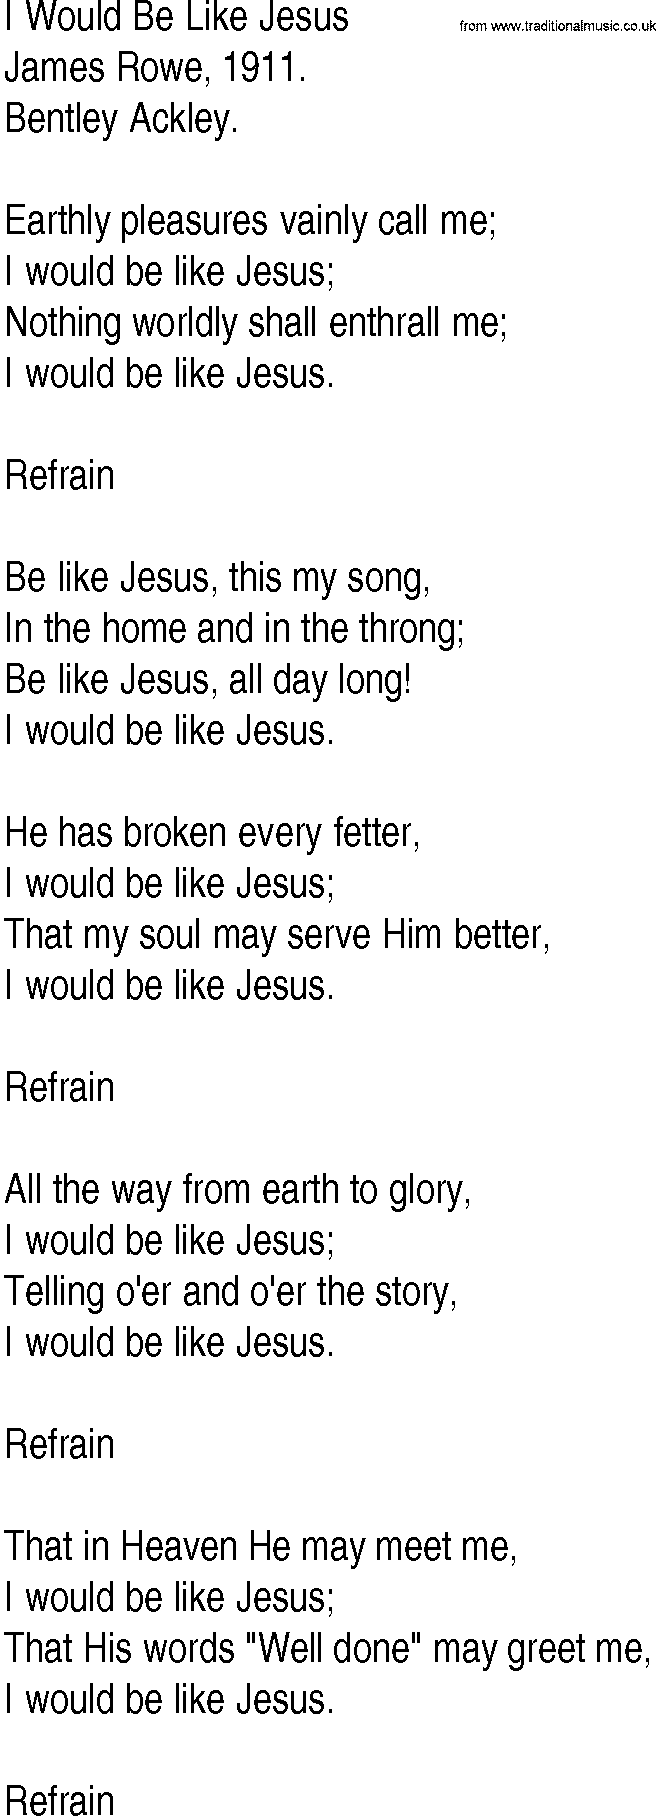 Hymn and Gospel Song: I Would Be Like Jesus by James Rowe lyrics